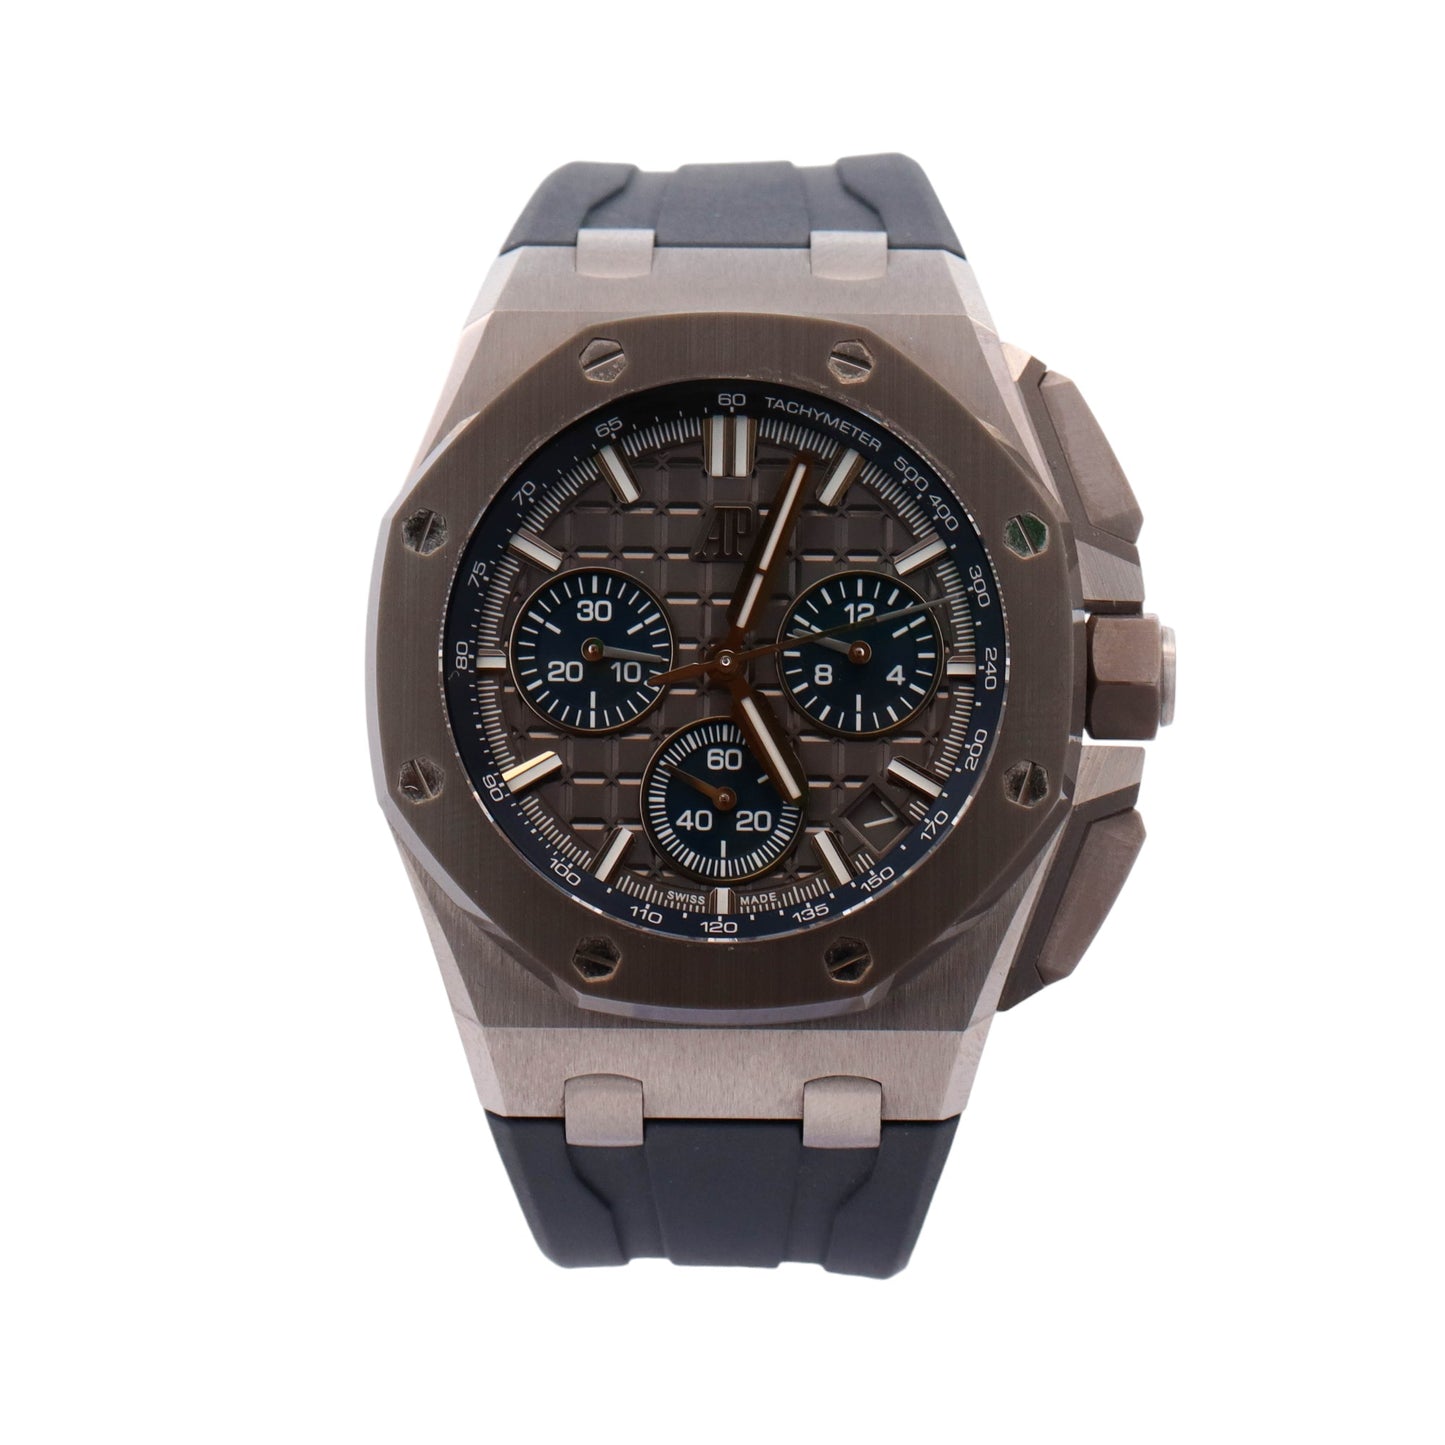 Audemars Piguet Royal Oak Offshore Stainless Steel Gray and Blue Chronograph Dial Watch Reference#  26420IO.OO.A009CA.01 - Happy Jewelers Fine Jewelry Lifetime Warranty